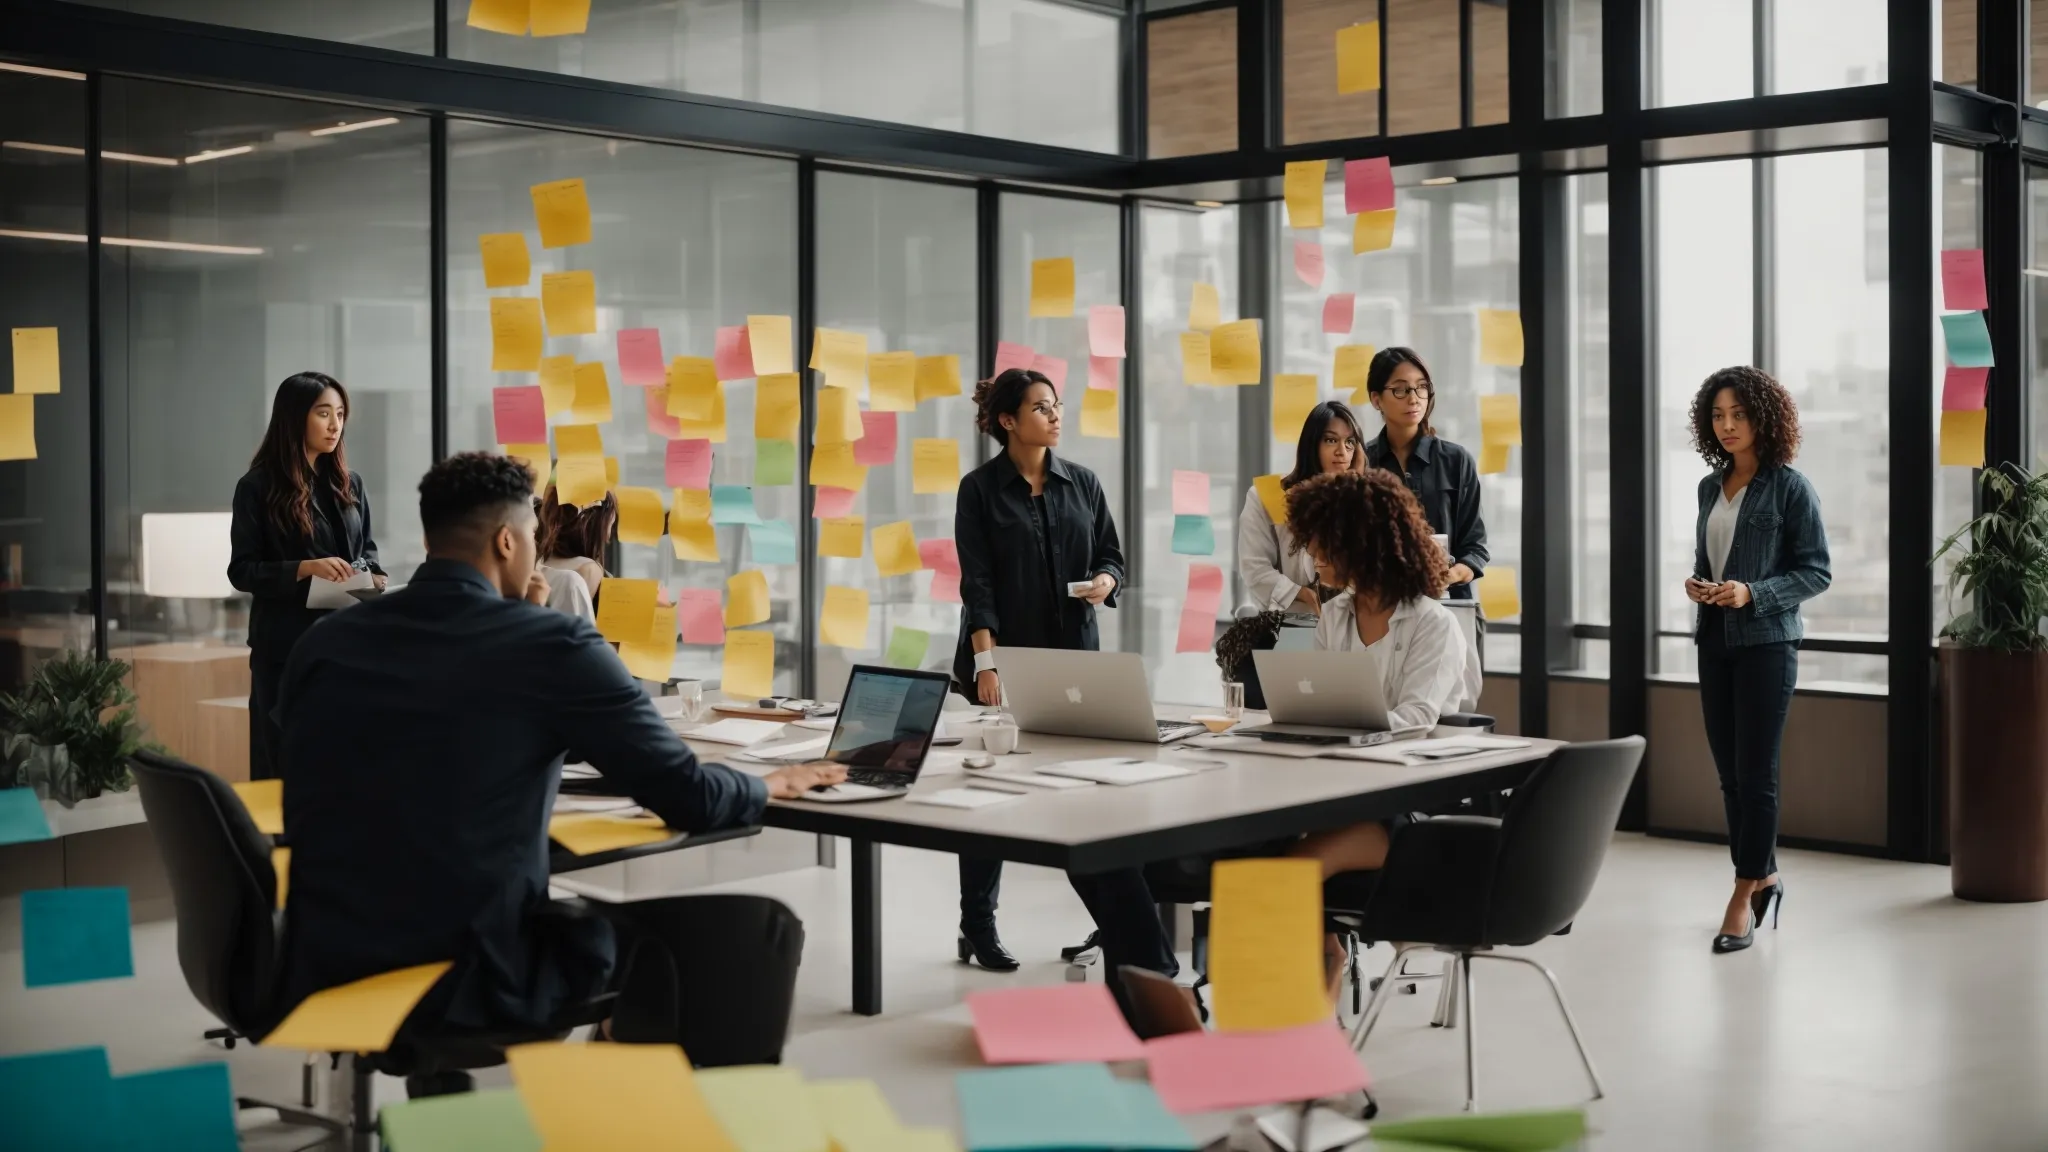 a team collaboratively brainstorming around a minimalist workspace with sleek laptops and vibrant sticky notes on a glass wall.